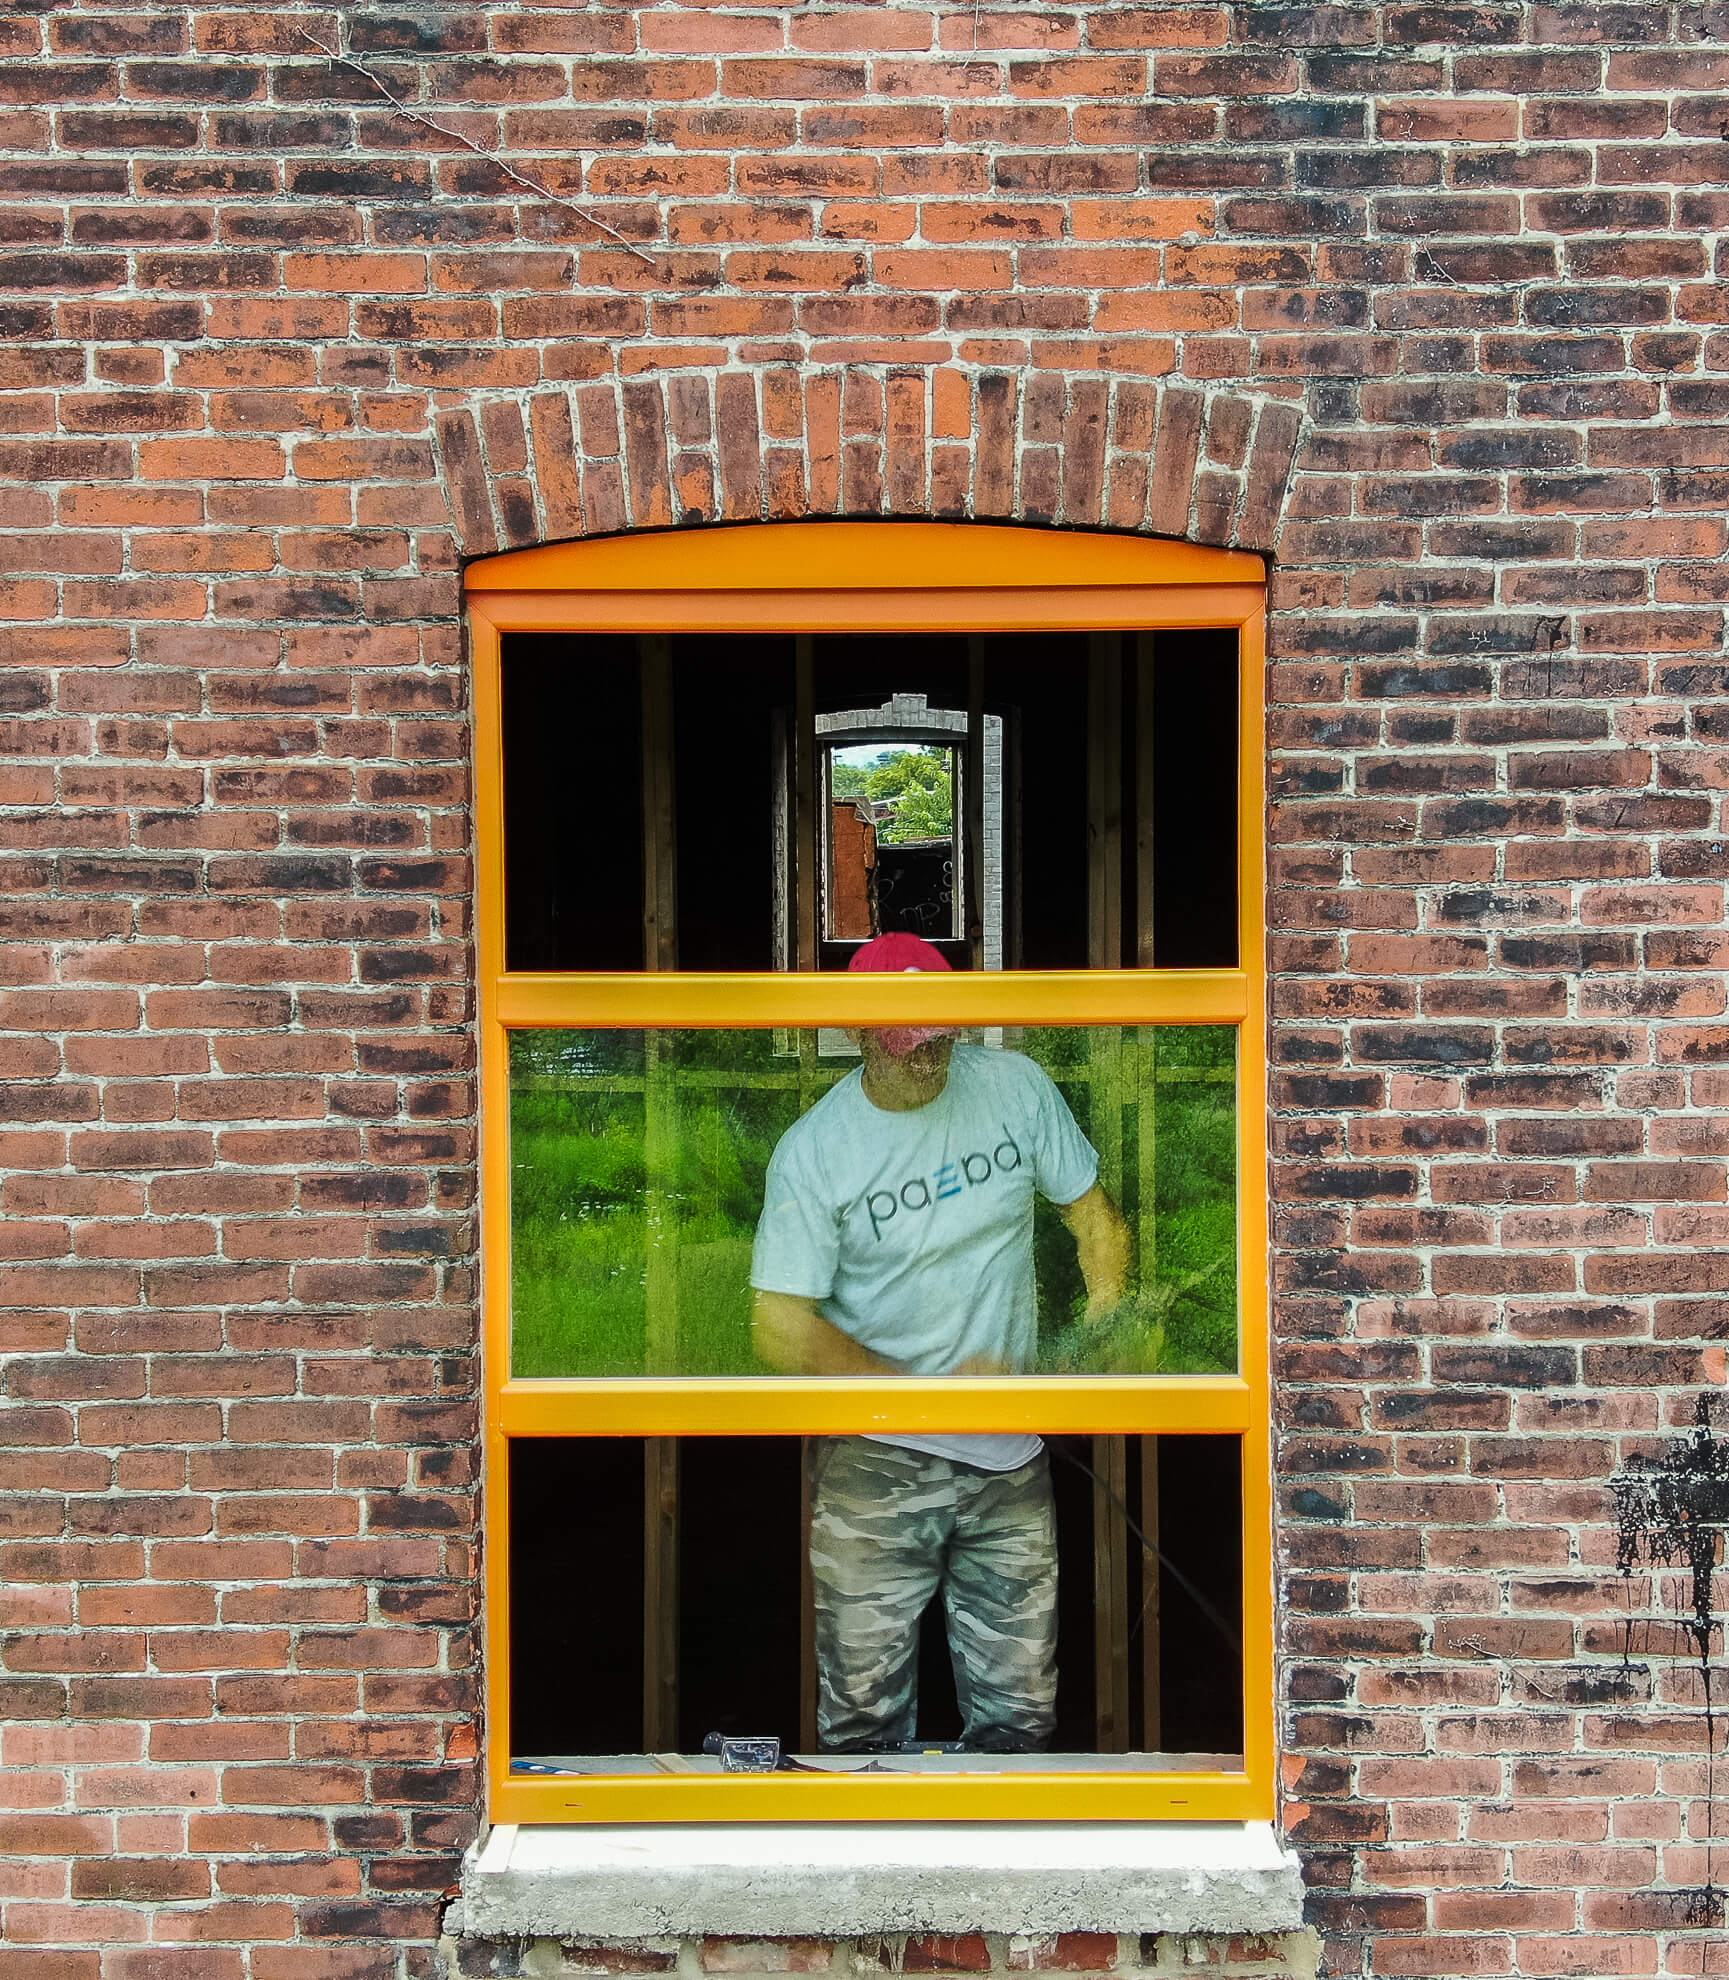 A man standing in the window of a brick building.